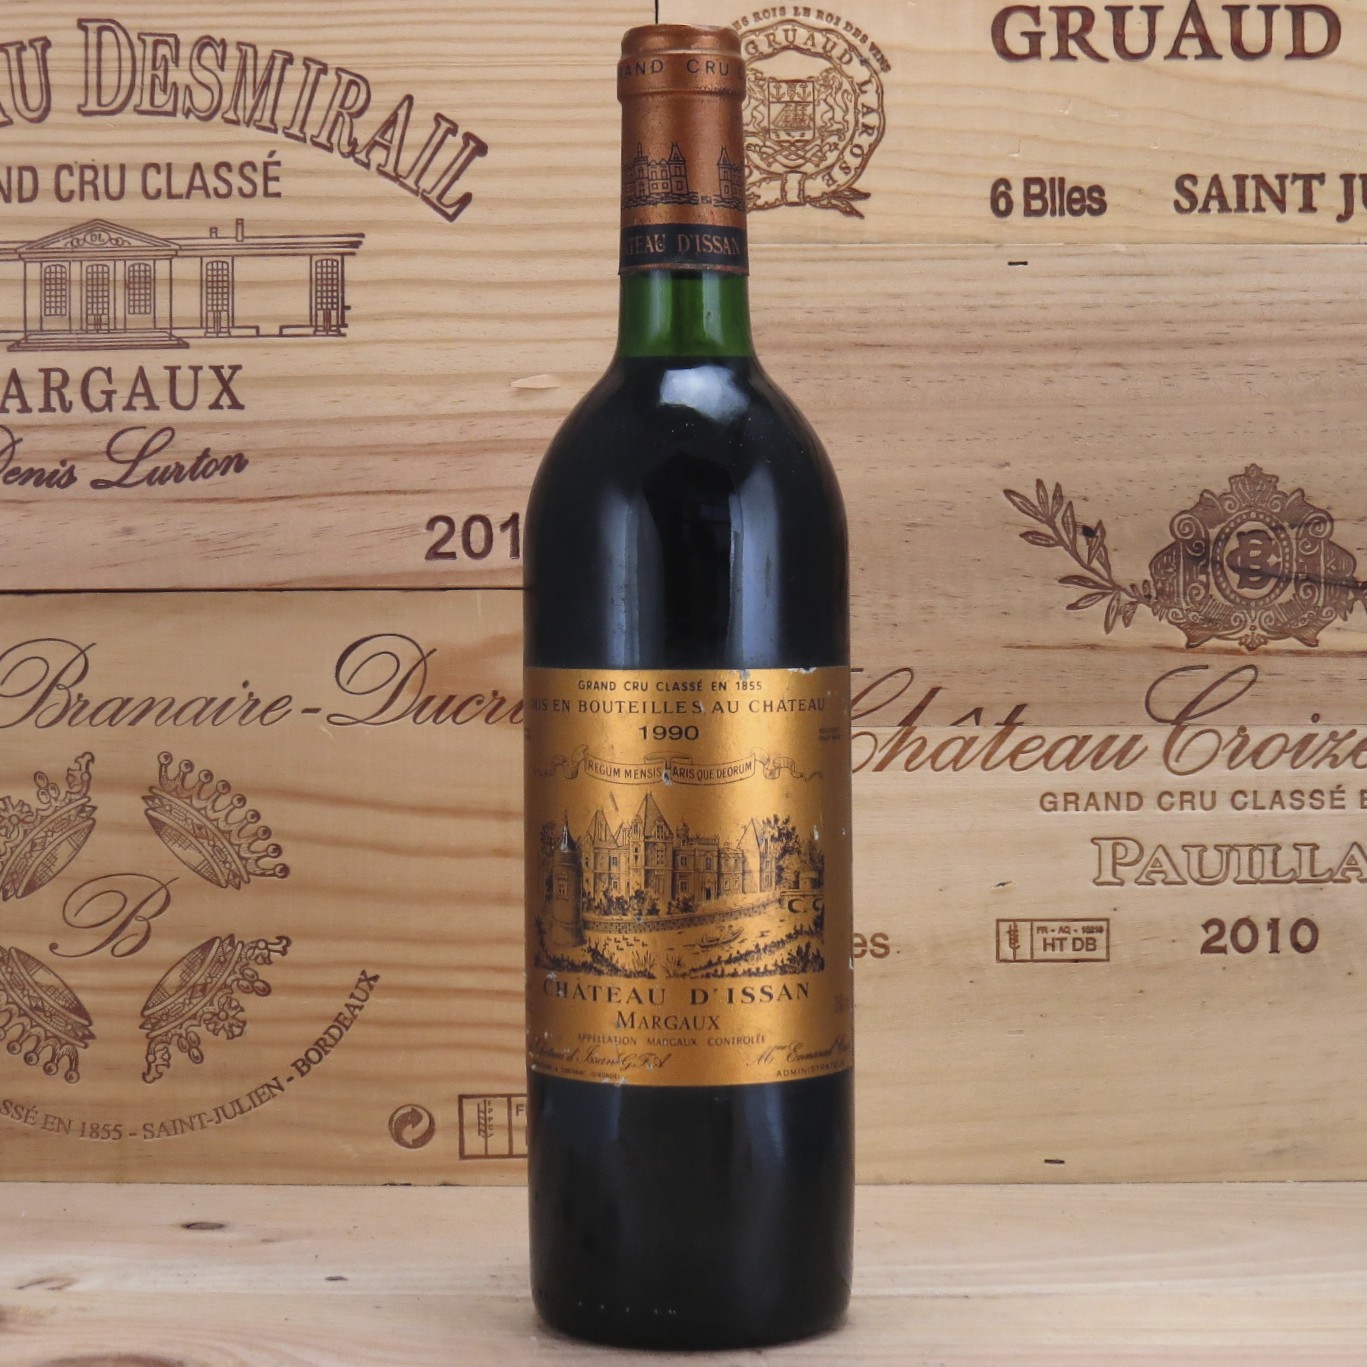 1990 Chateau d'Issan